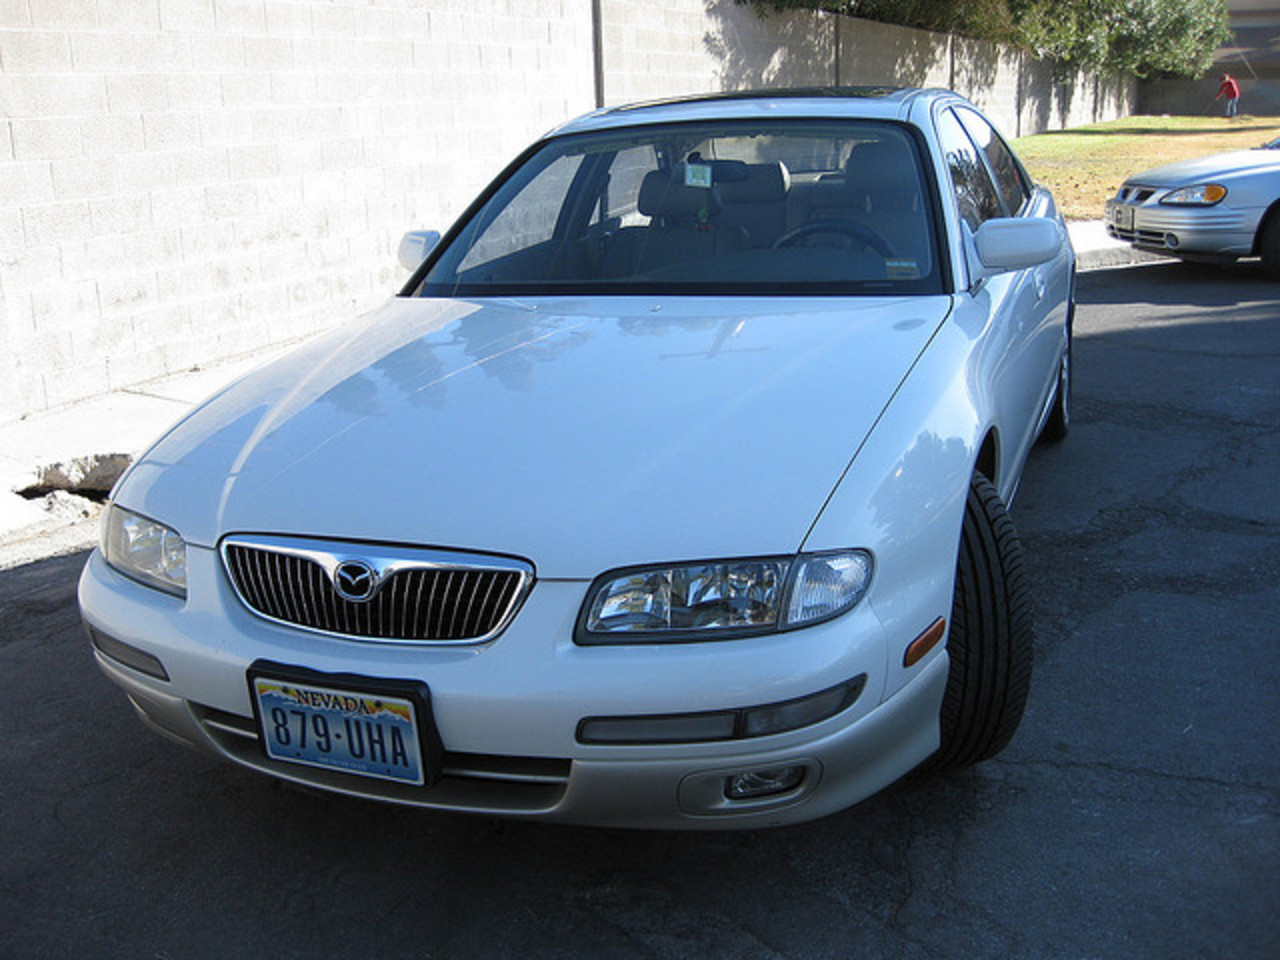 2000 Mazda Millenia for sale all power | Flickr - Photo Sharing!